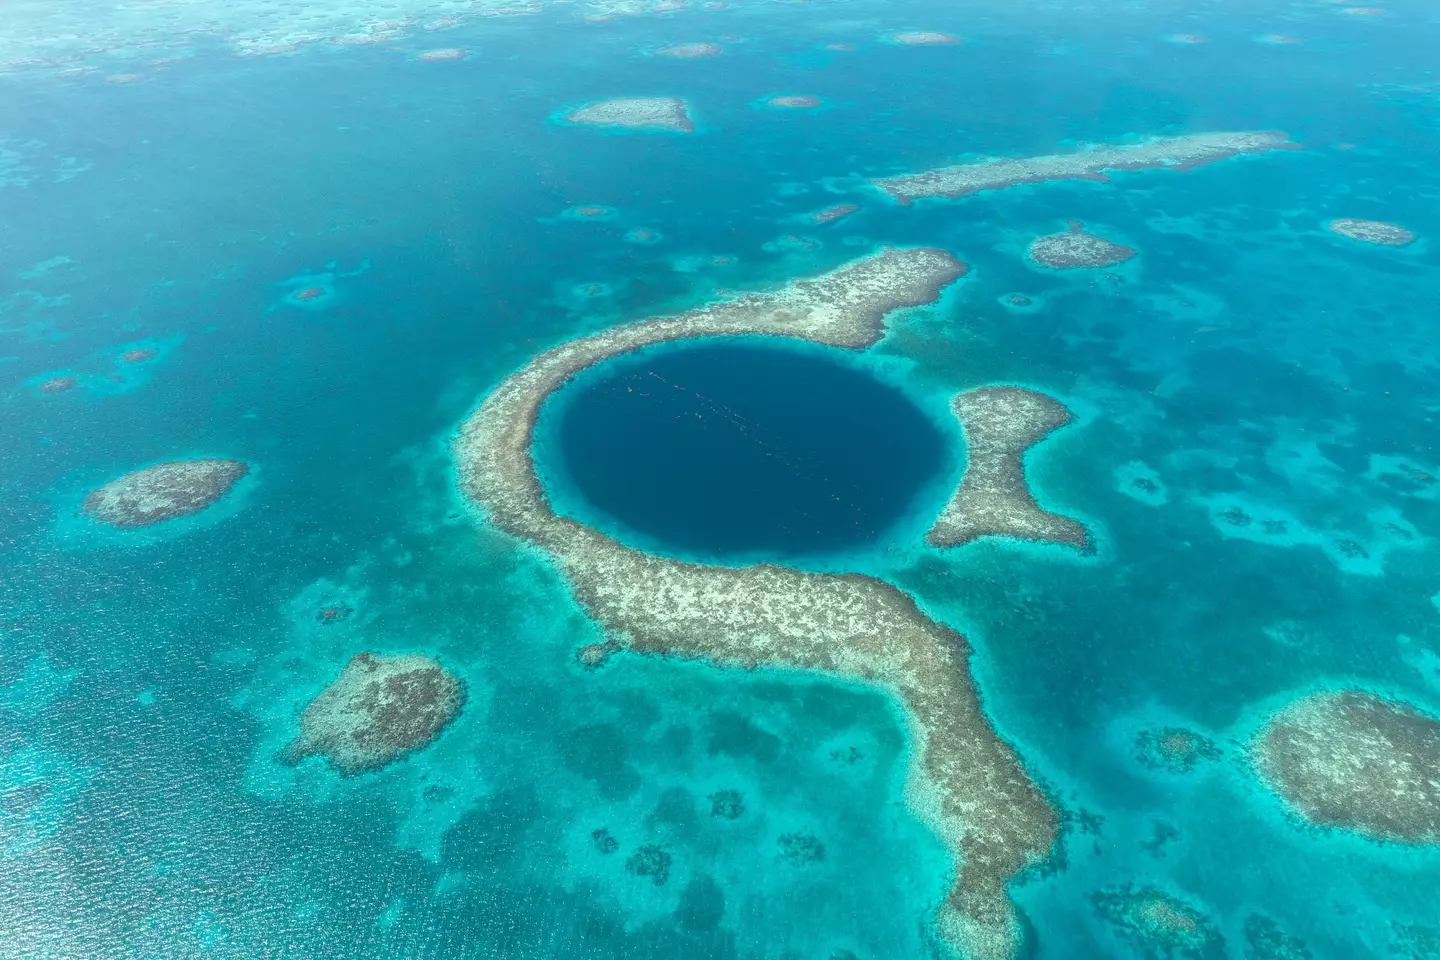 For years, divers were unable to explore much of the hole.